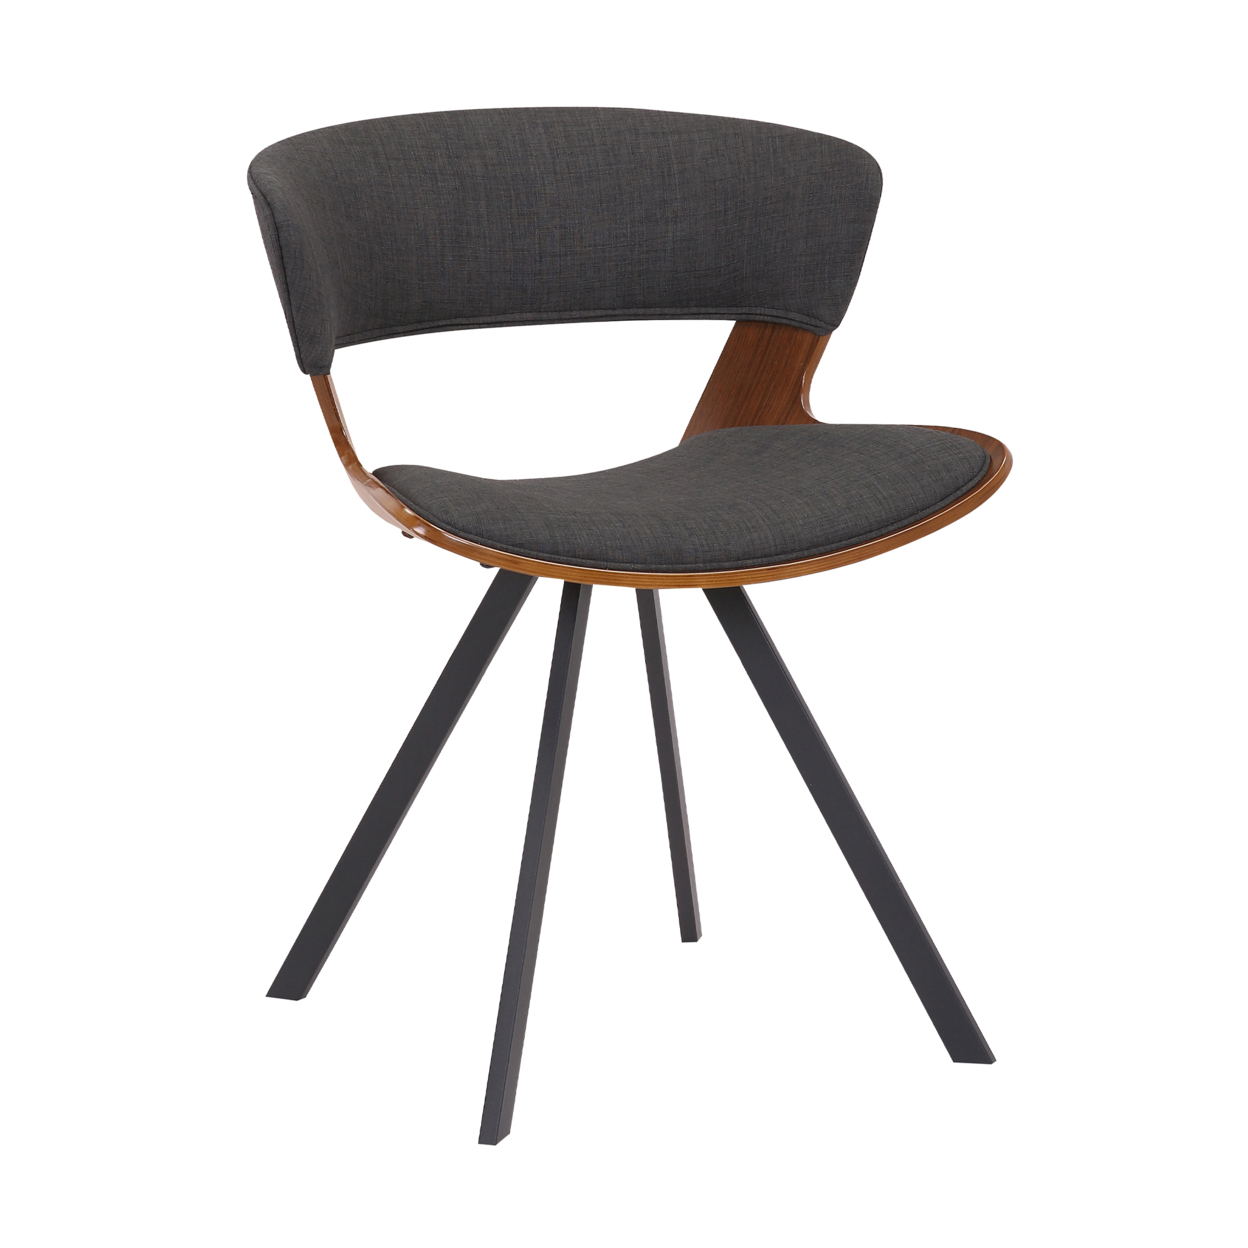 18 Inches Curved Padded Dining Chair With Angled Legs, Brown And Black- Saltoro Sherpi